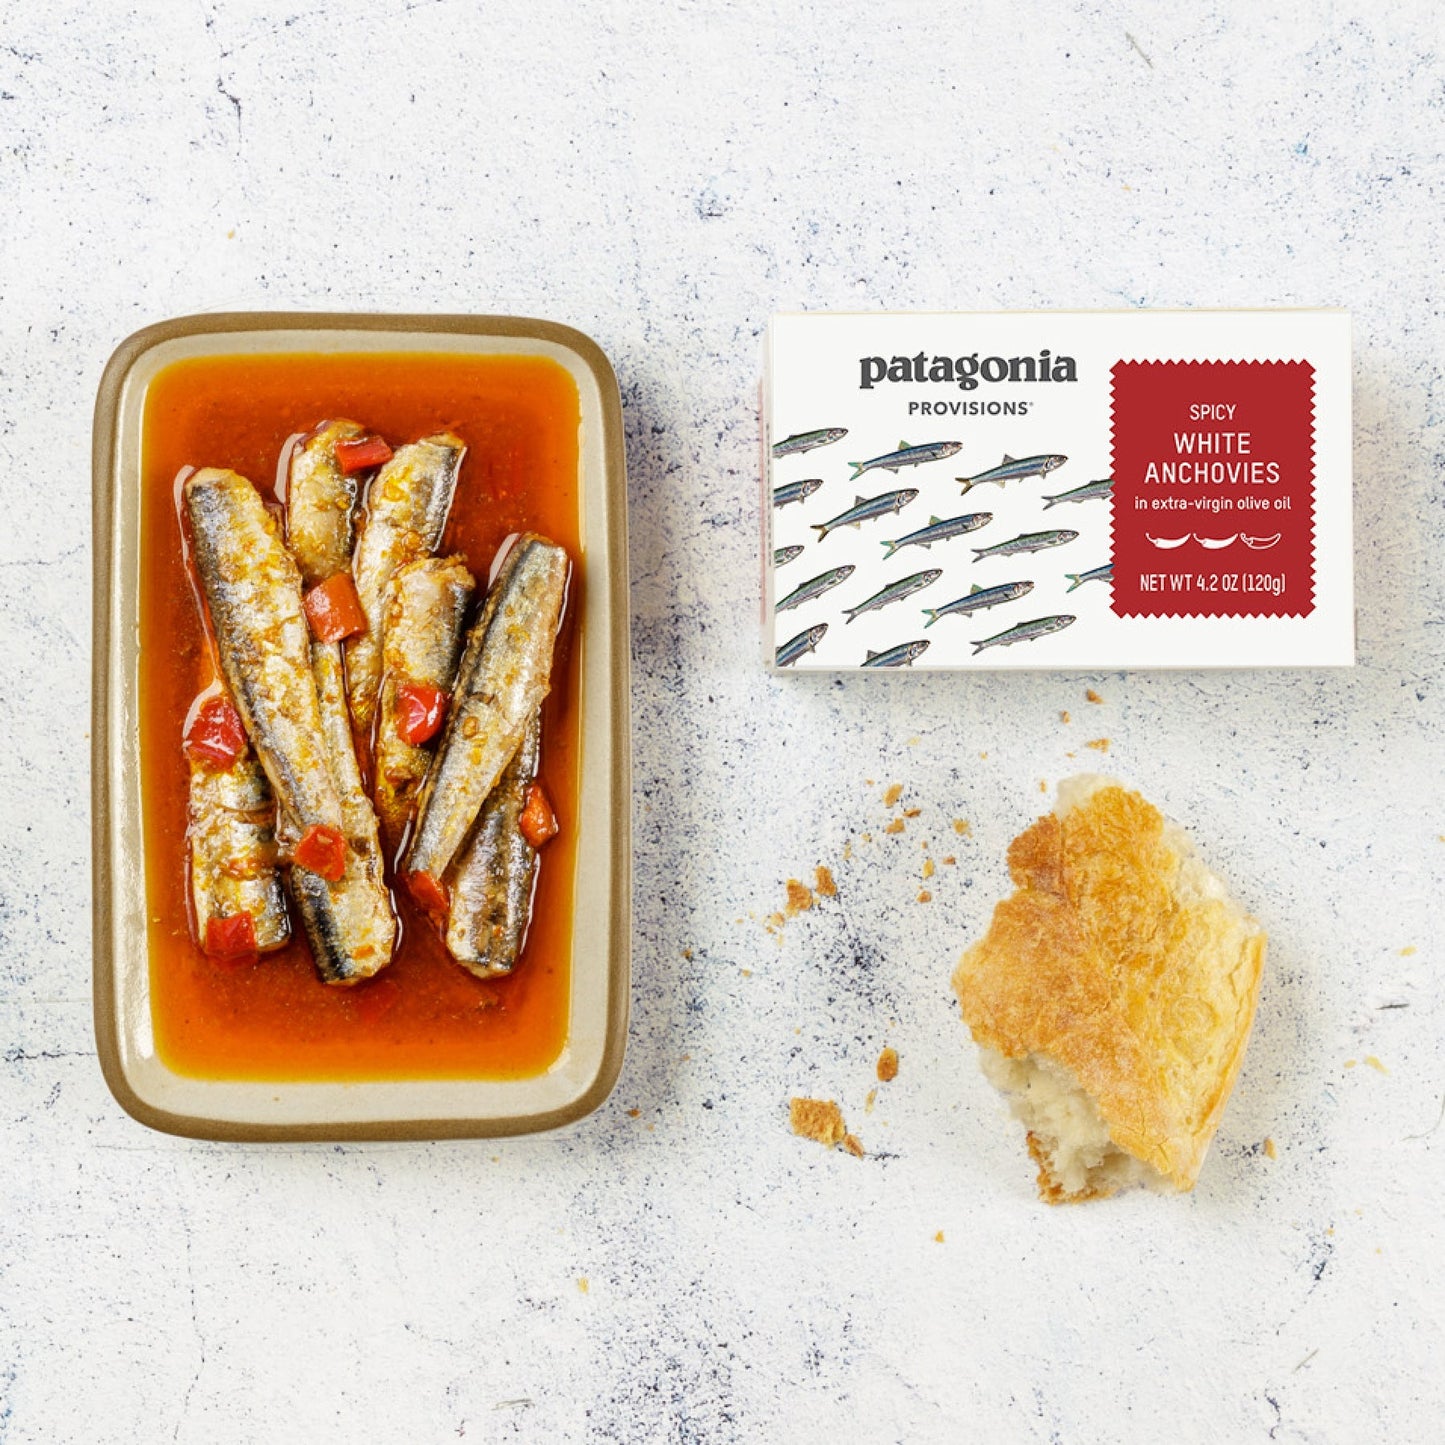 Spicy White Anchovies, Patagonia Provisions, Spain